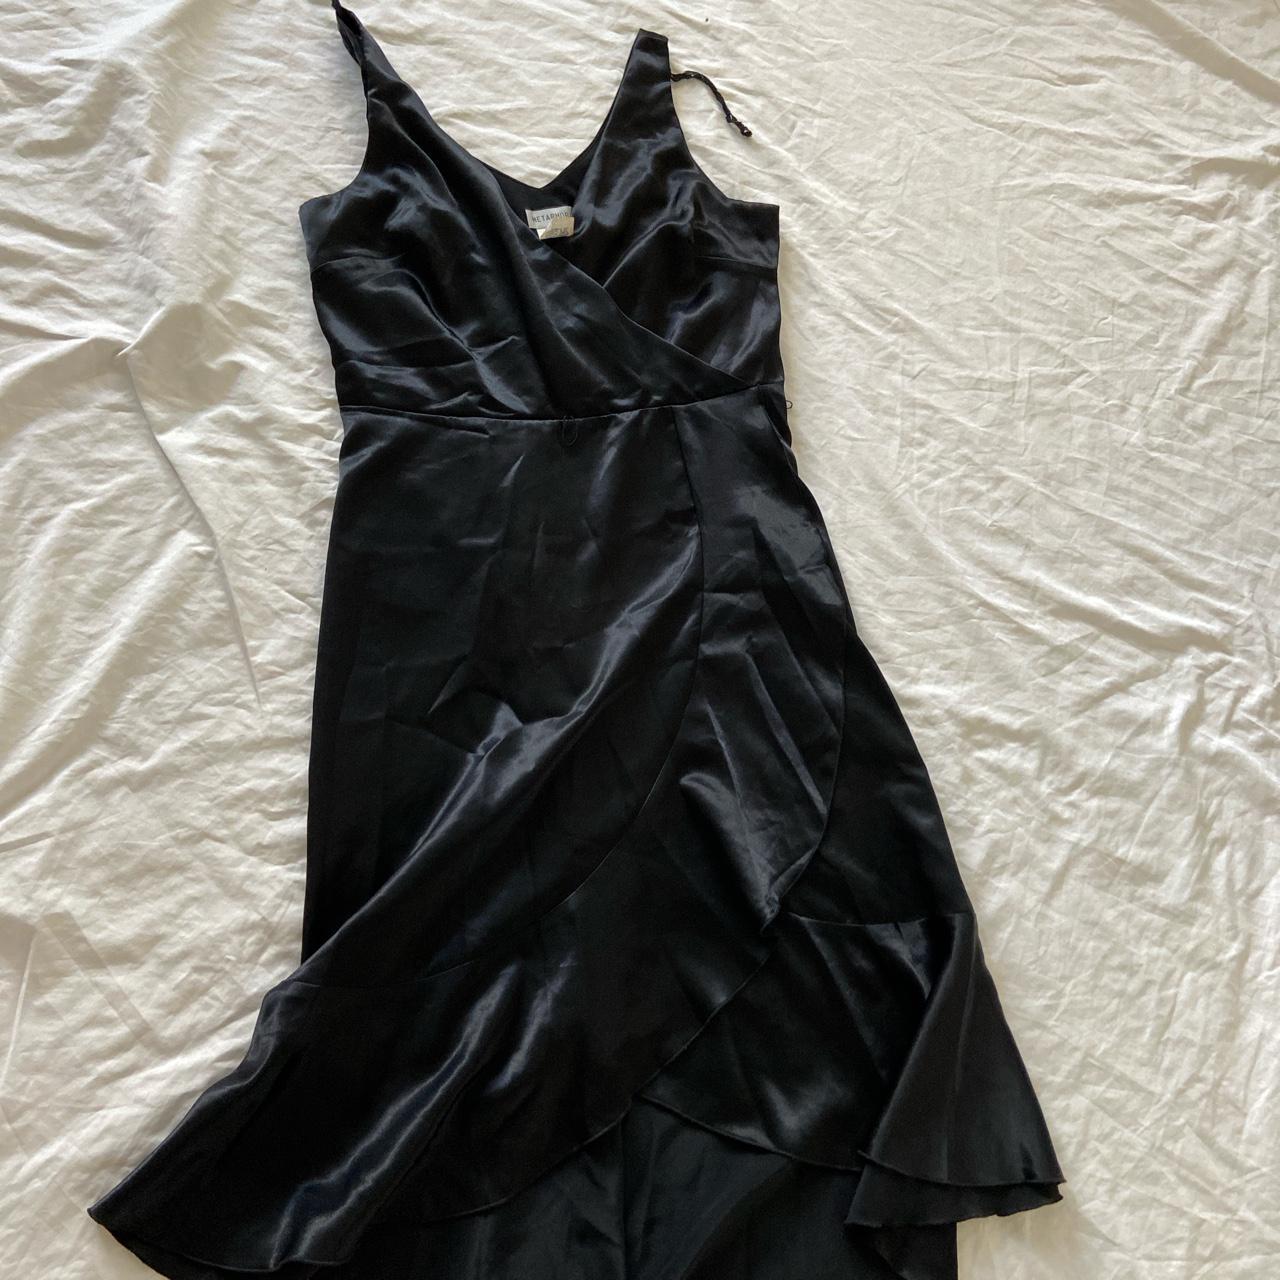 Gothic burlesque style evening cocktail dress by... - Depop